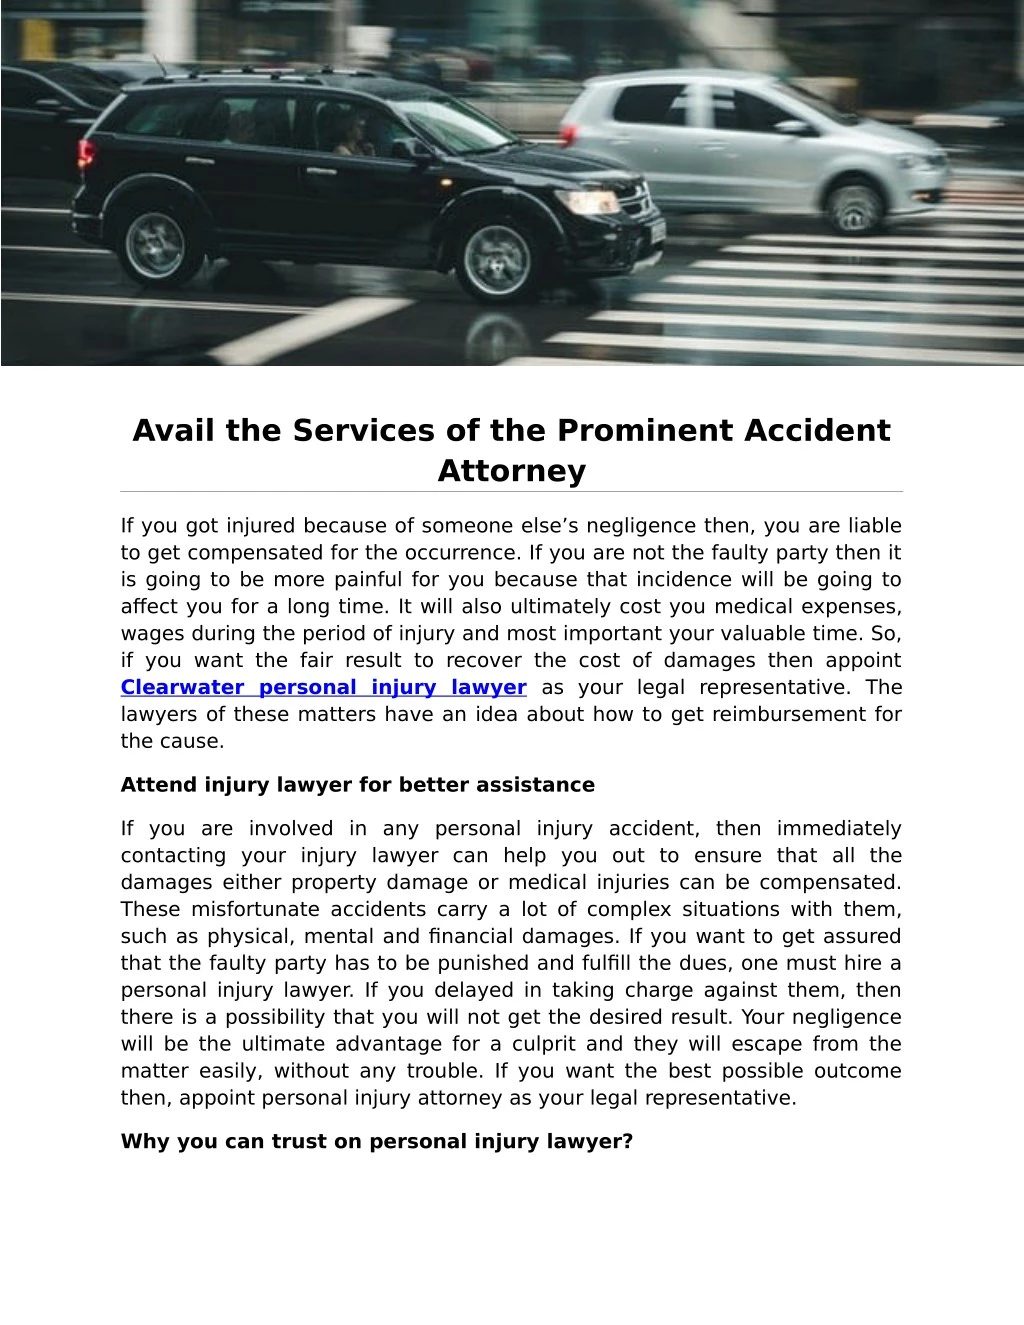 avail the services of the prominent accident